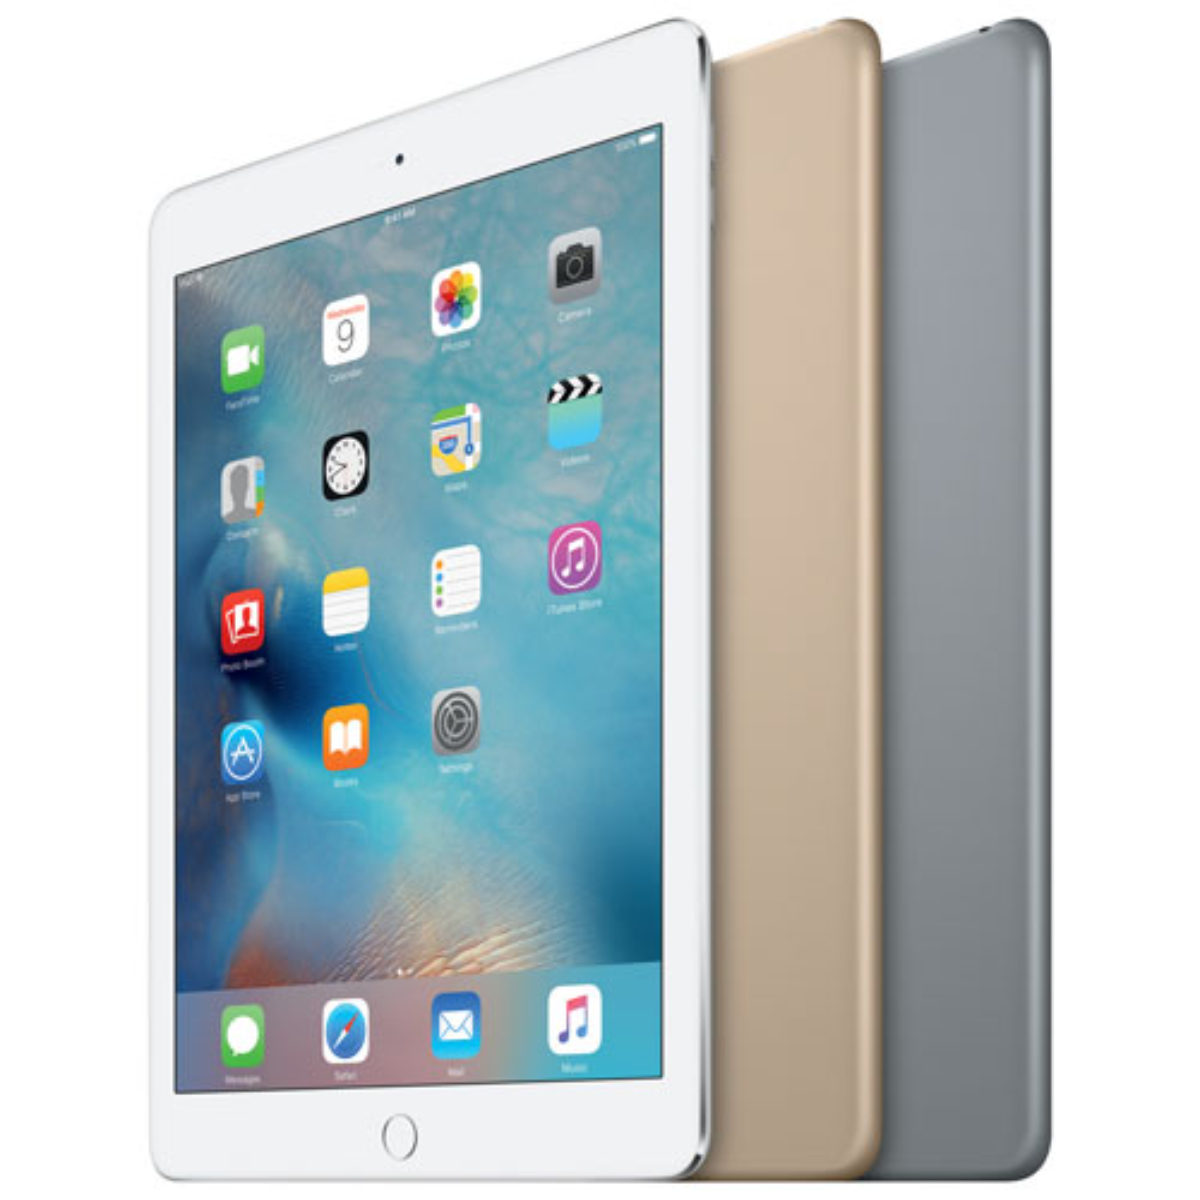 Ipad Air 16 gig | Freedom Rent To Own